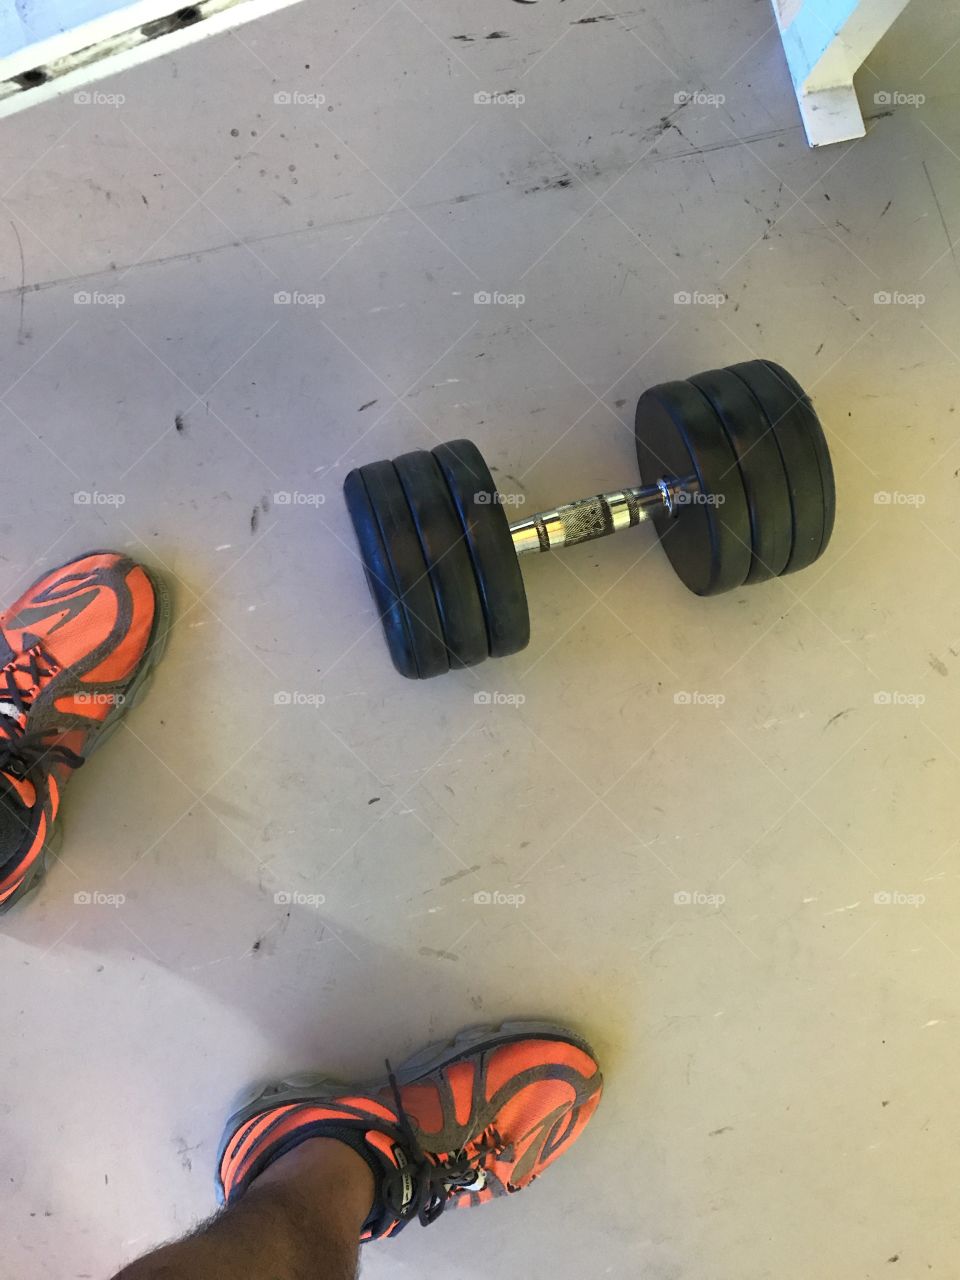 Workout concept dumbbell in the floor 